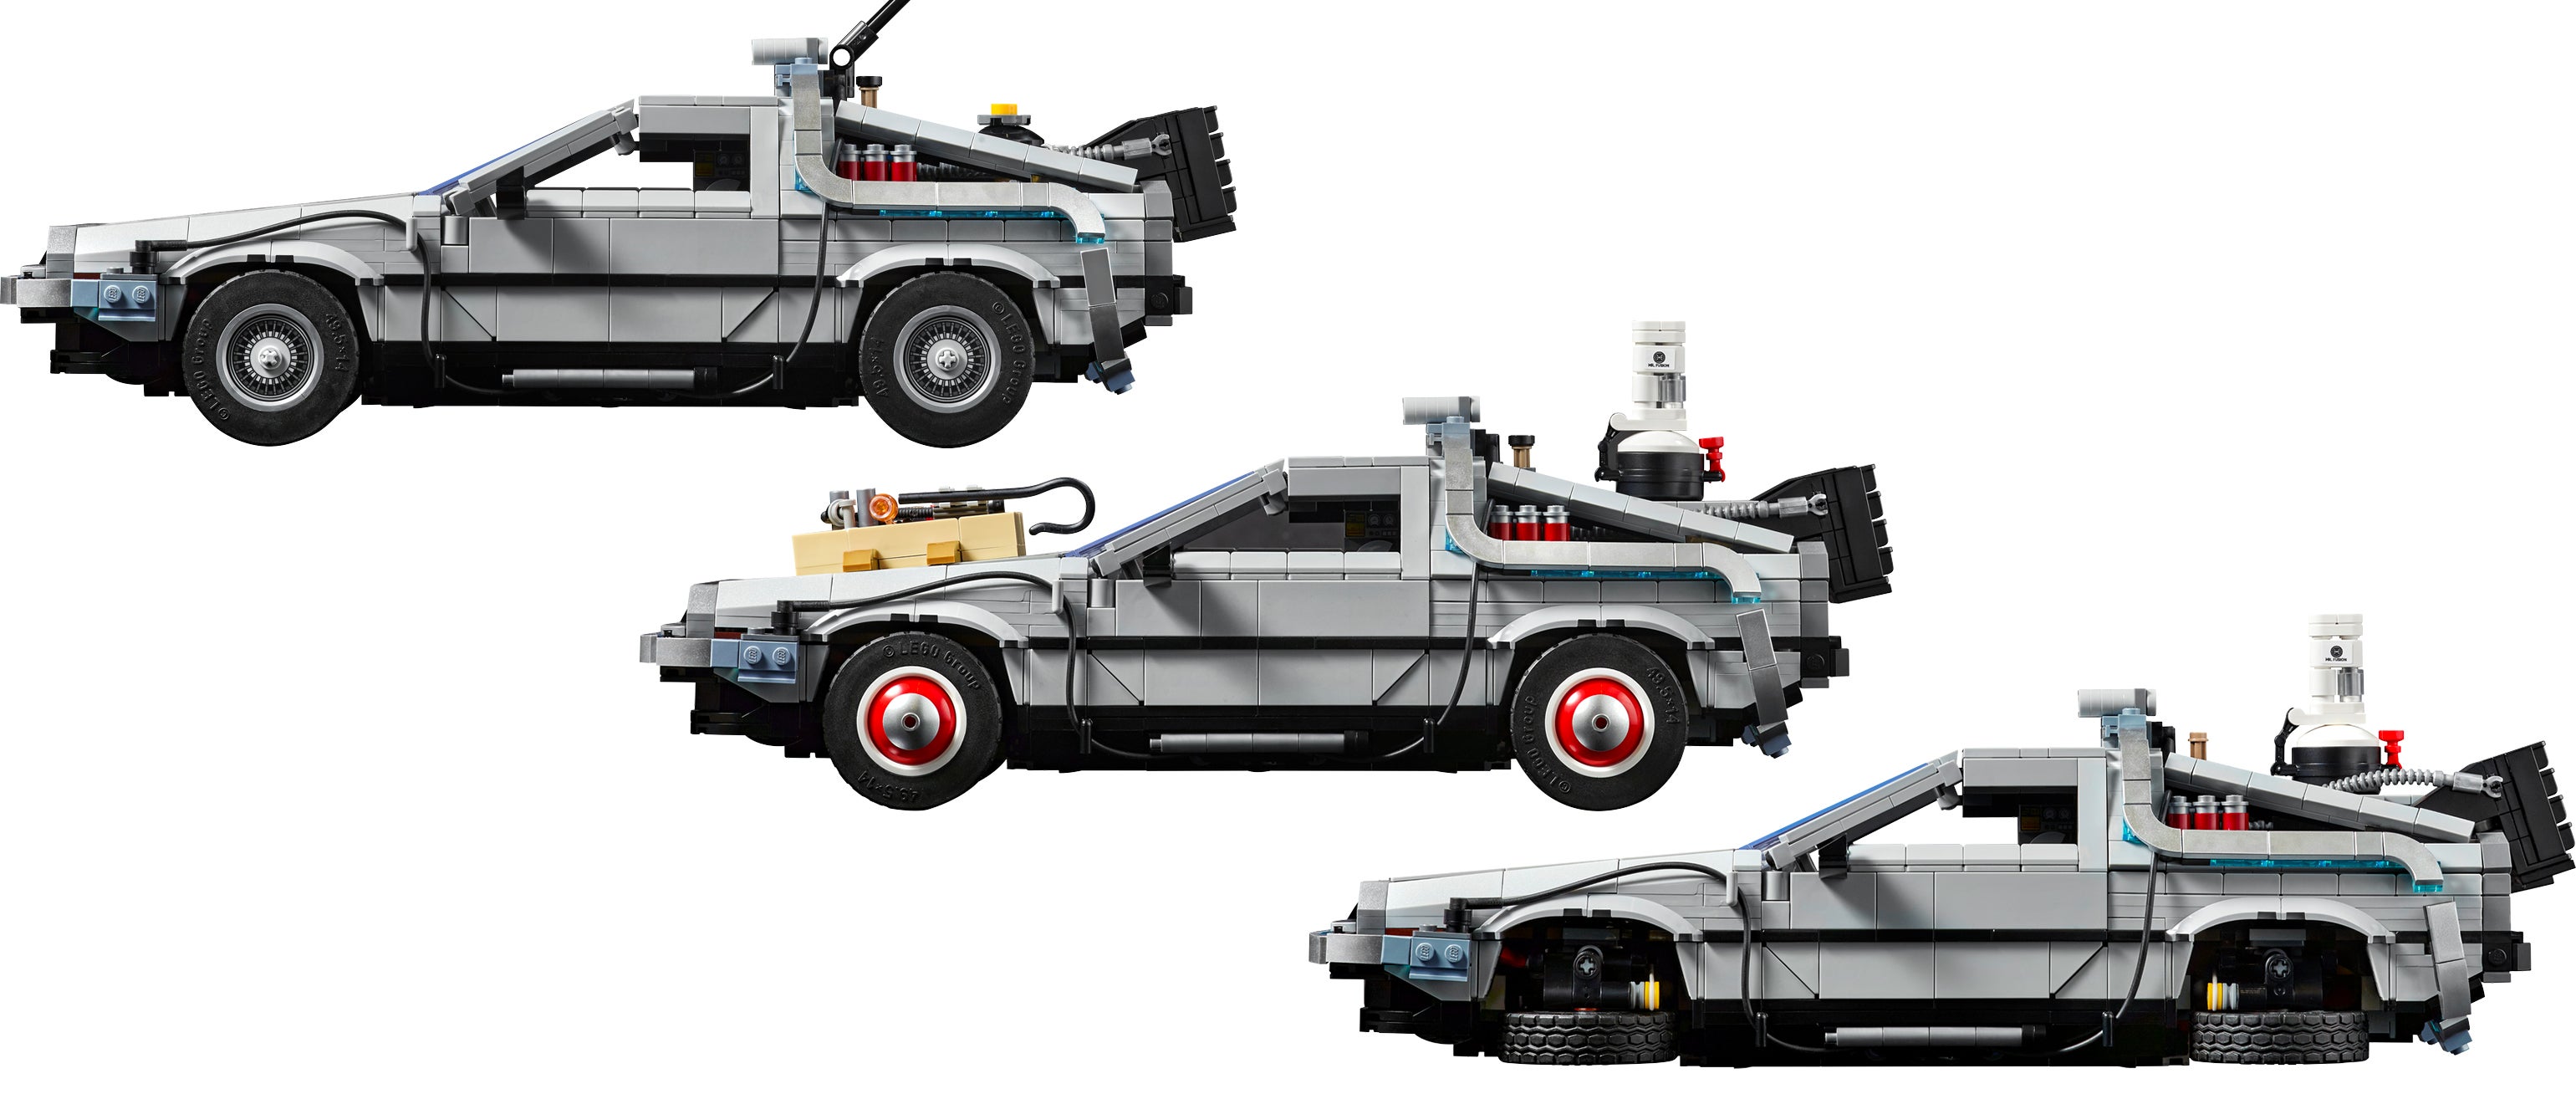 Lego’s New Back to the Future DeLorean Lets You Build Versions From All Three Movies